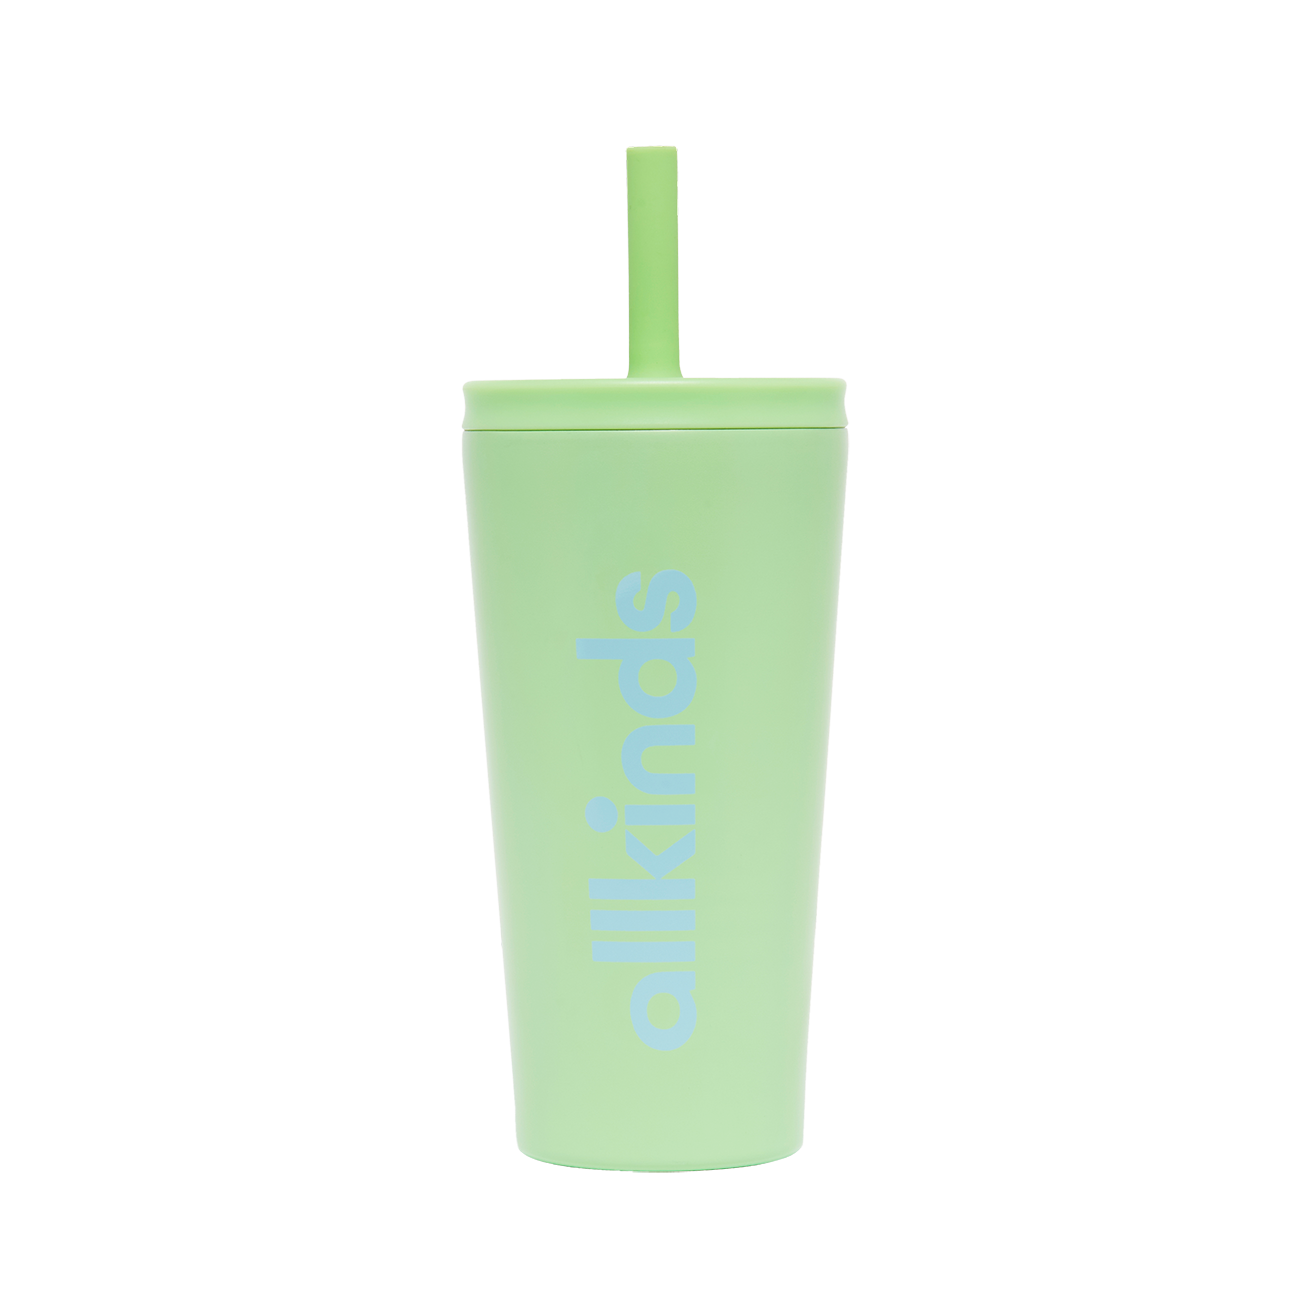 Smoothie Cup - Allkinds